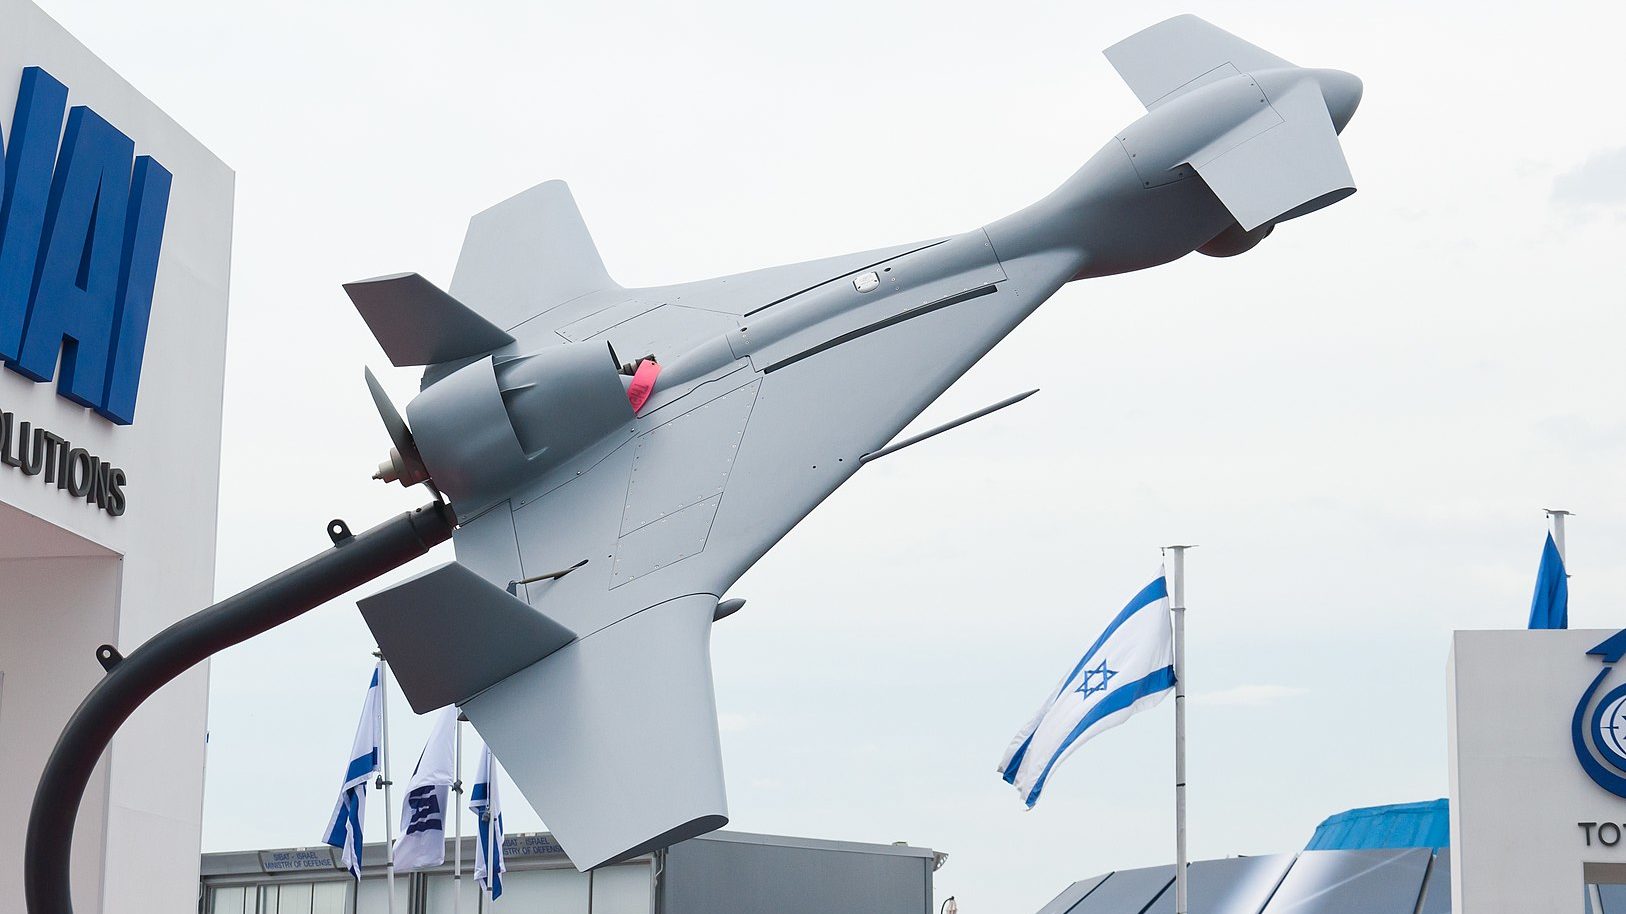 Morocco To Manufacture ‘Kamikaze’ Drones Using Israeli Technology, Local Media Reporting